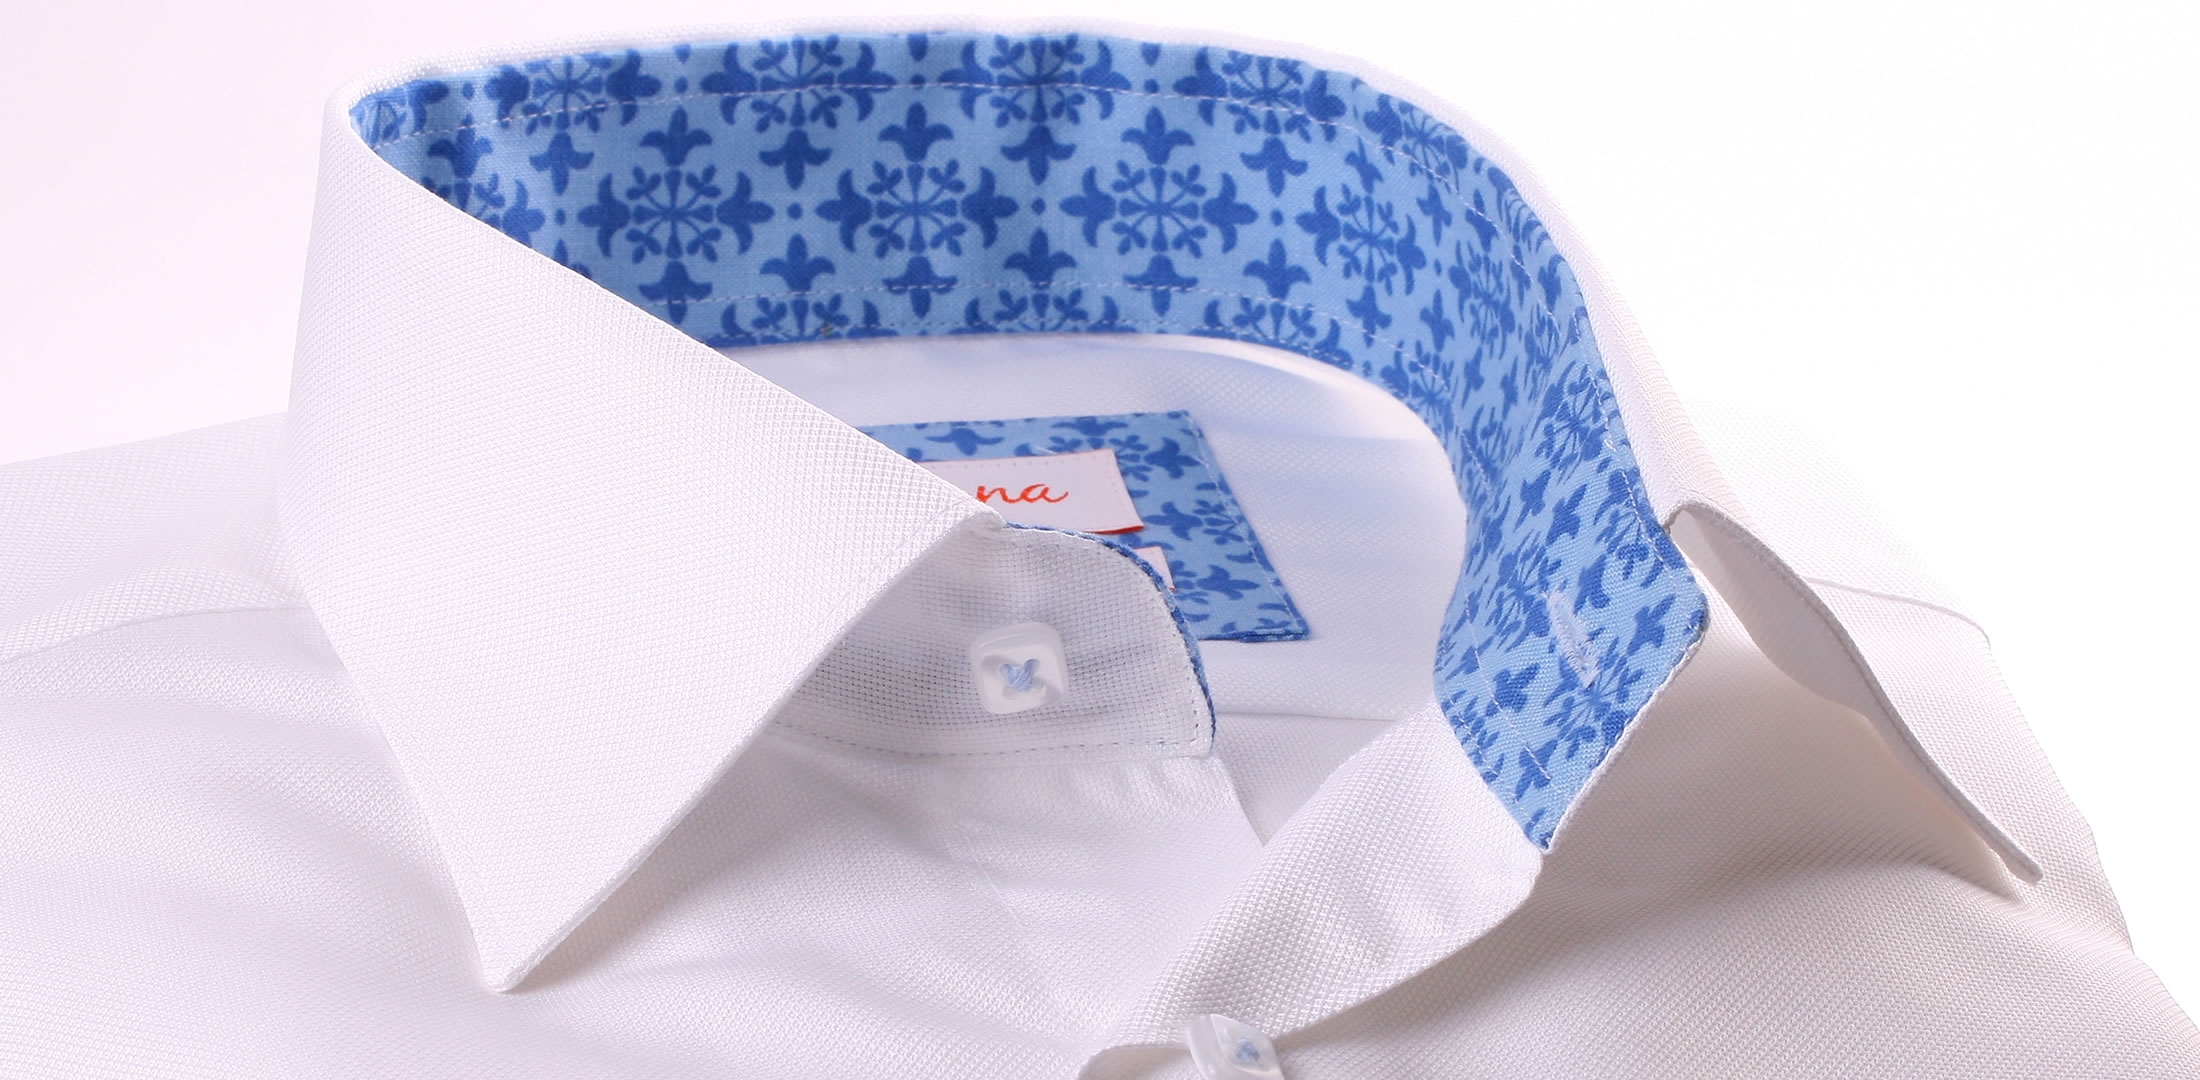 White french cuff shirt with blue patterns collar and cuffs